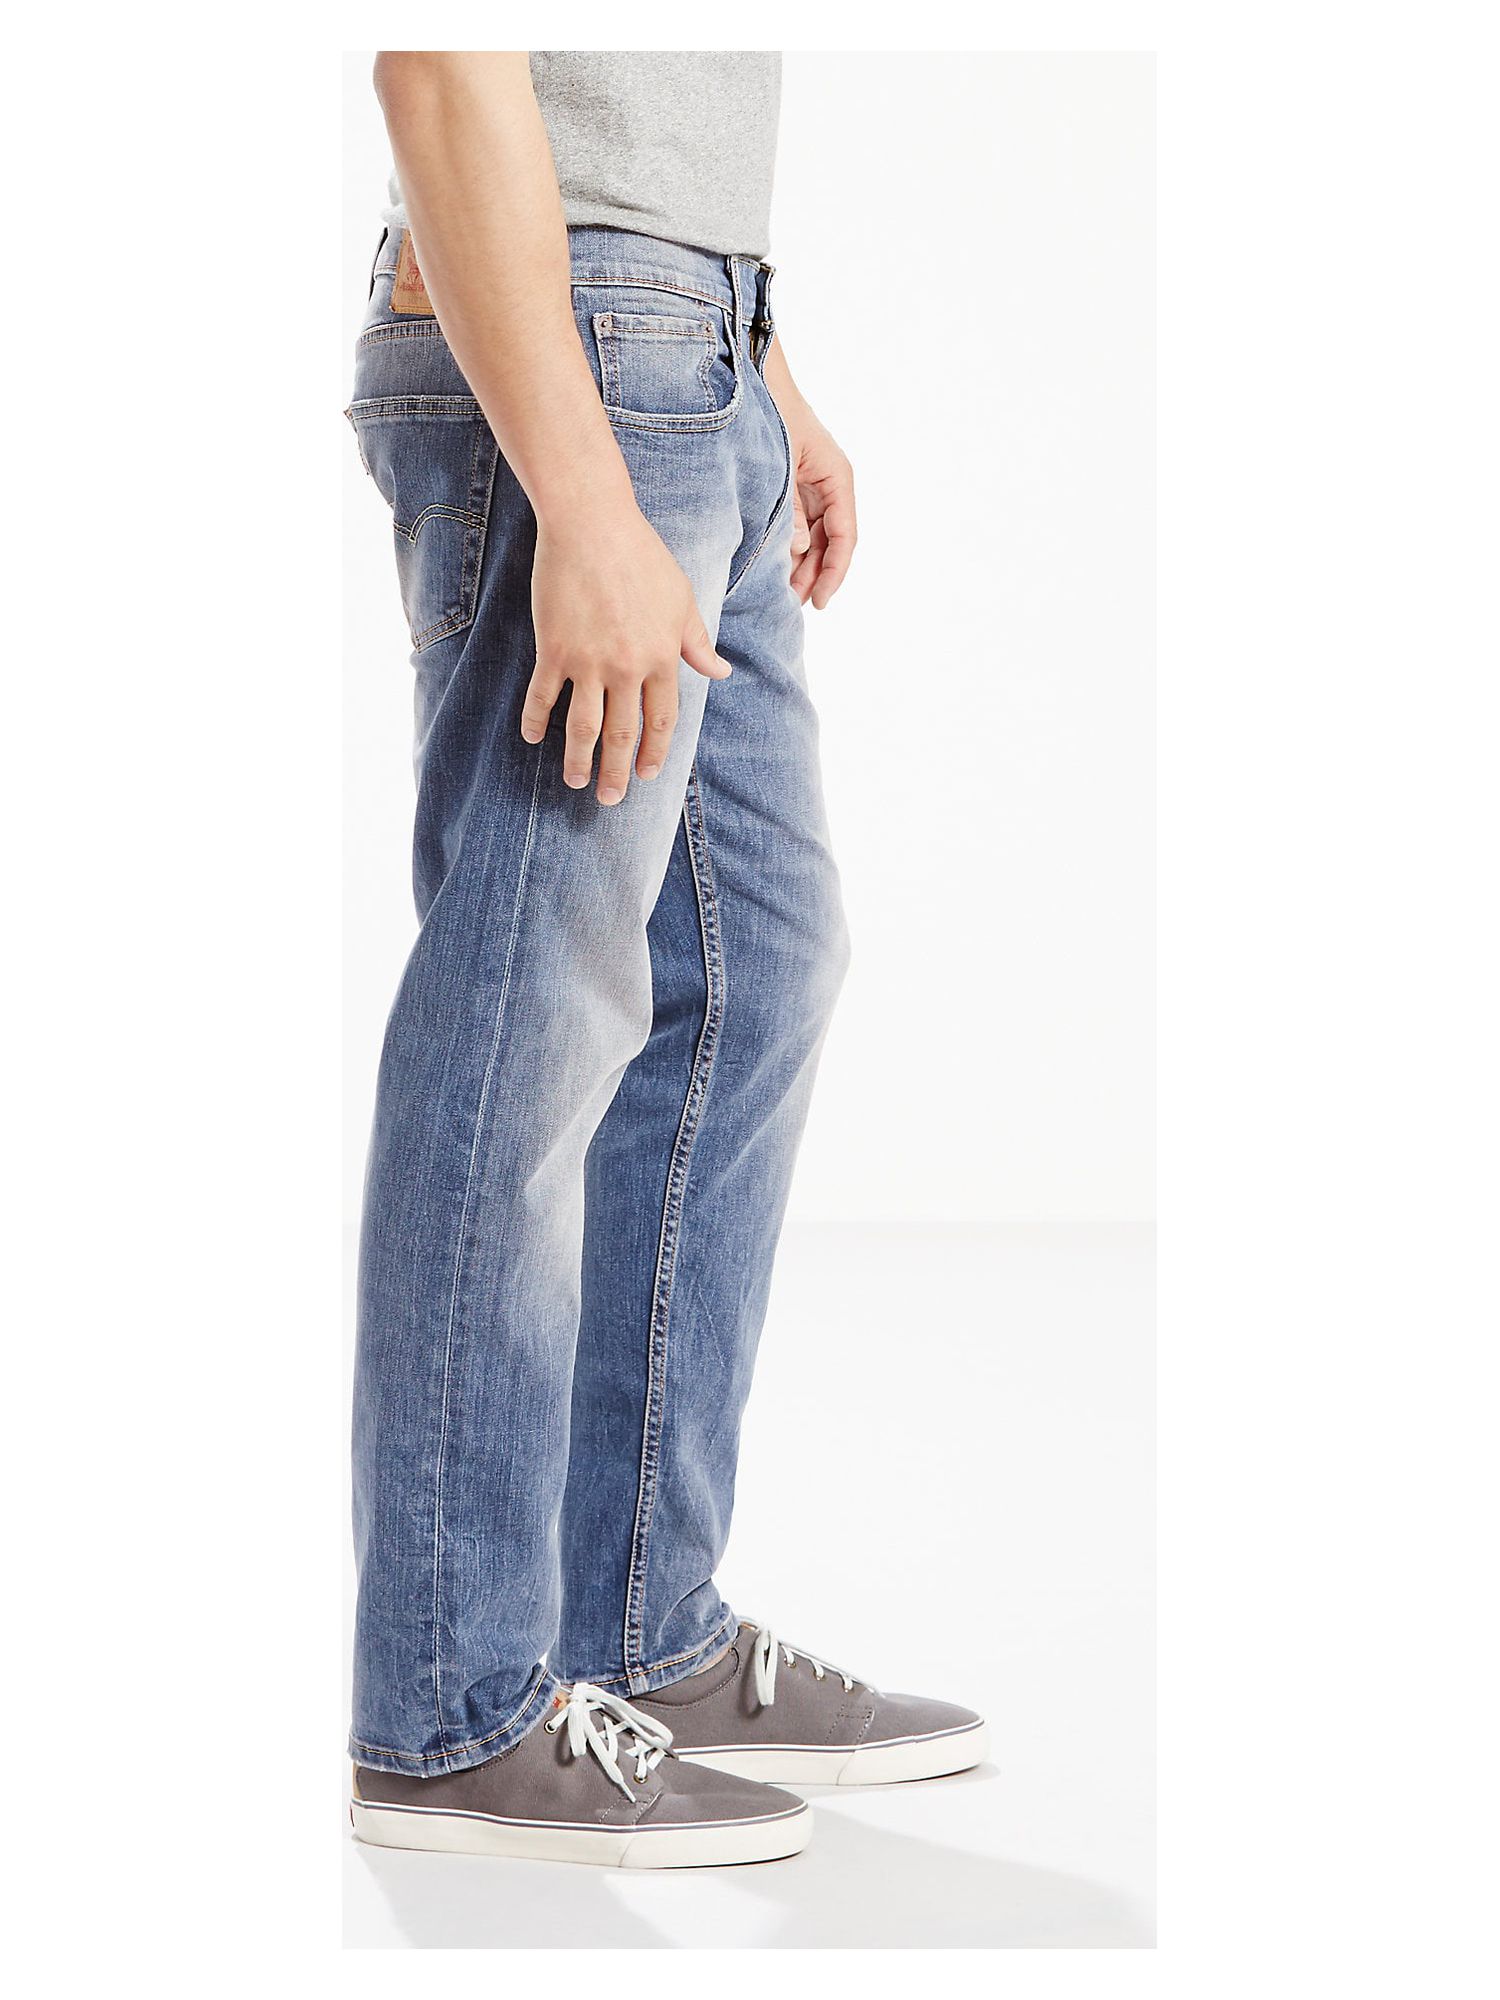 Levi's Mens 502 Regular Fit Stretch Tapered Jeans - image 4 of 7